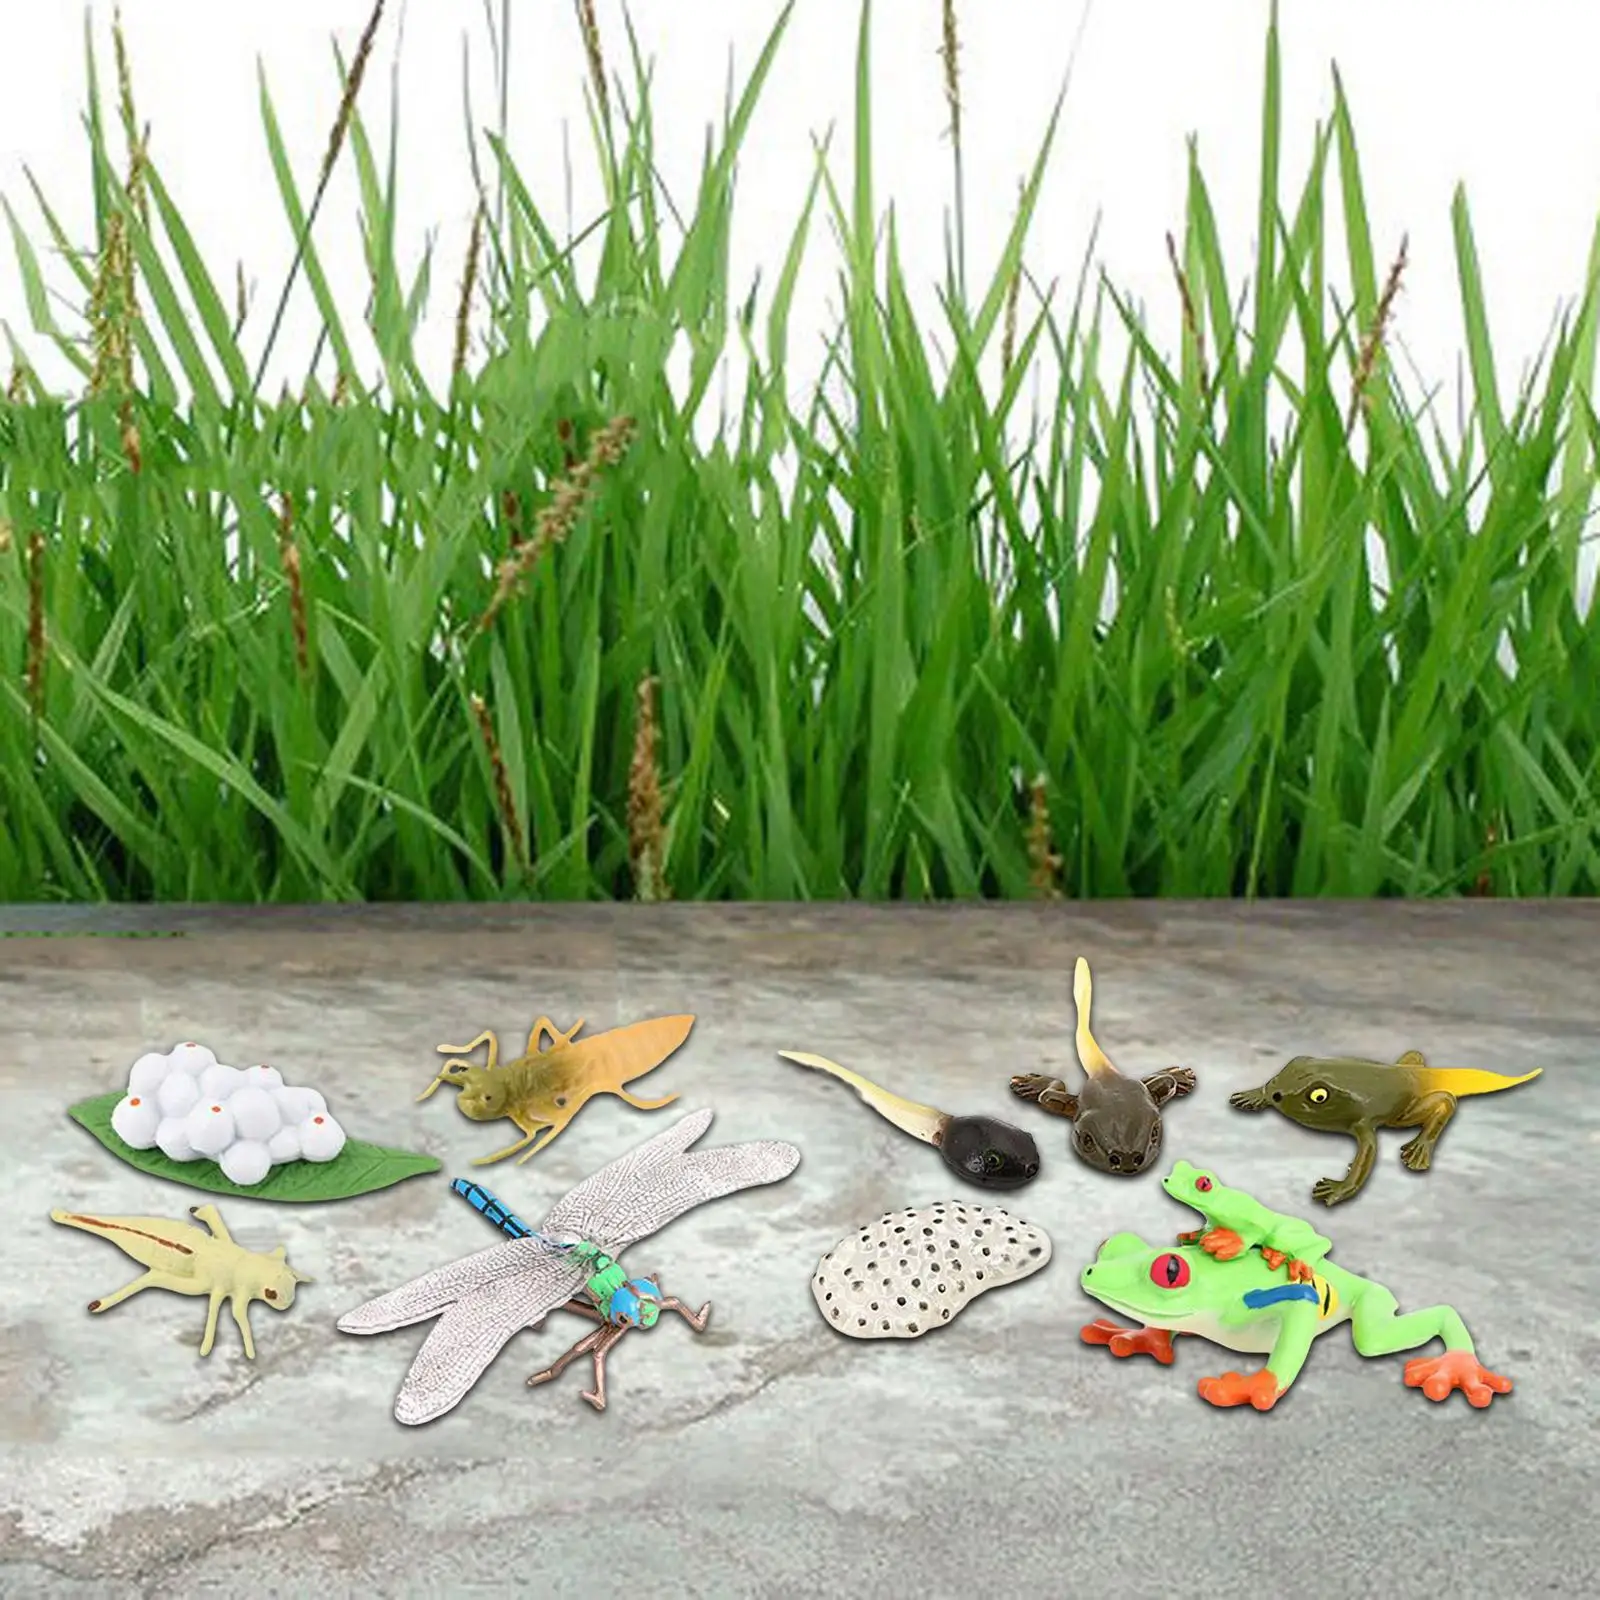 Simulation Life Cycle Figurines Toy Red Eyed Tree Frog Figures Dragonfly Figures Animal Growth Cycle for Party Favors Toddlers